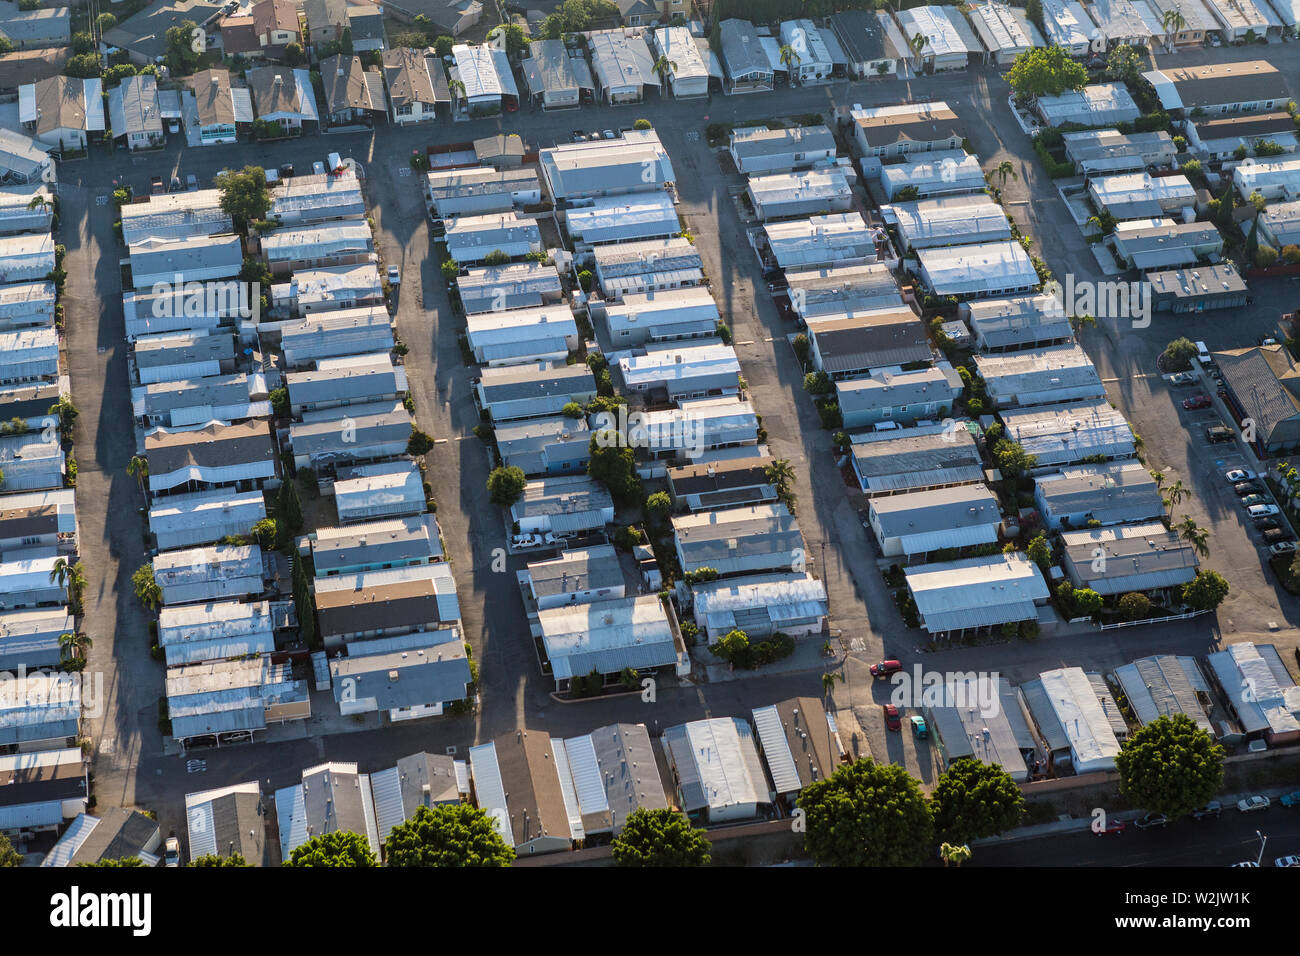 Aerial view of generic older mobile home rooftops in the southwest United States. Stock Photo